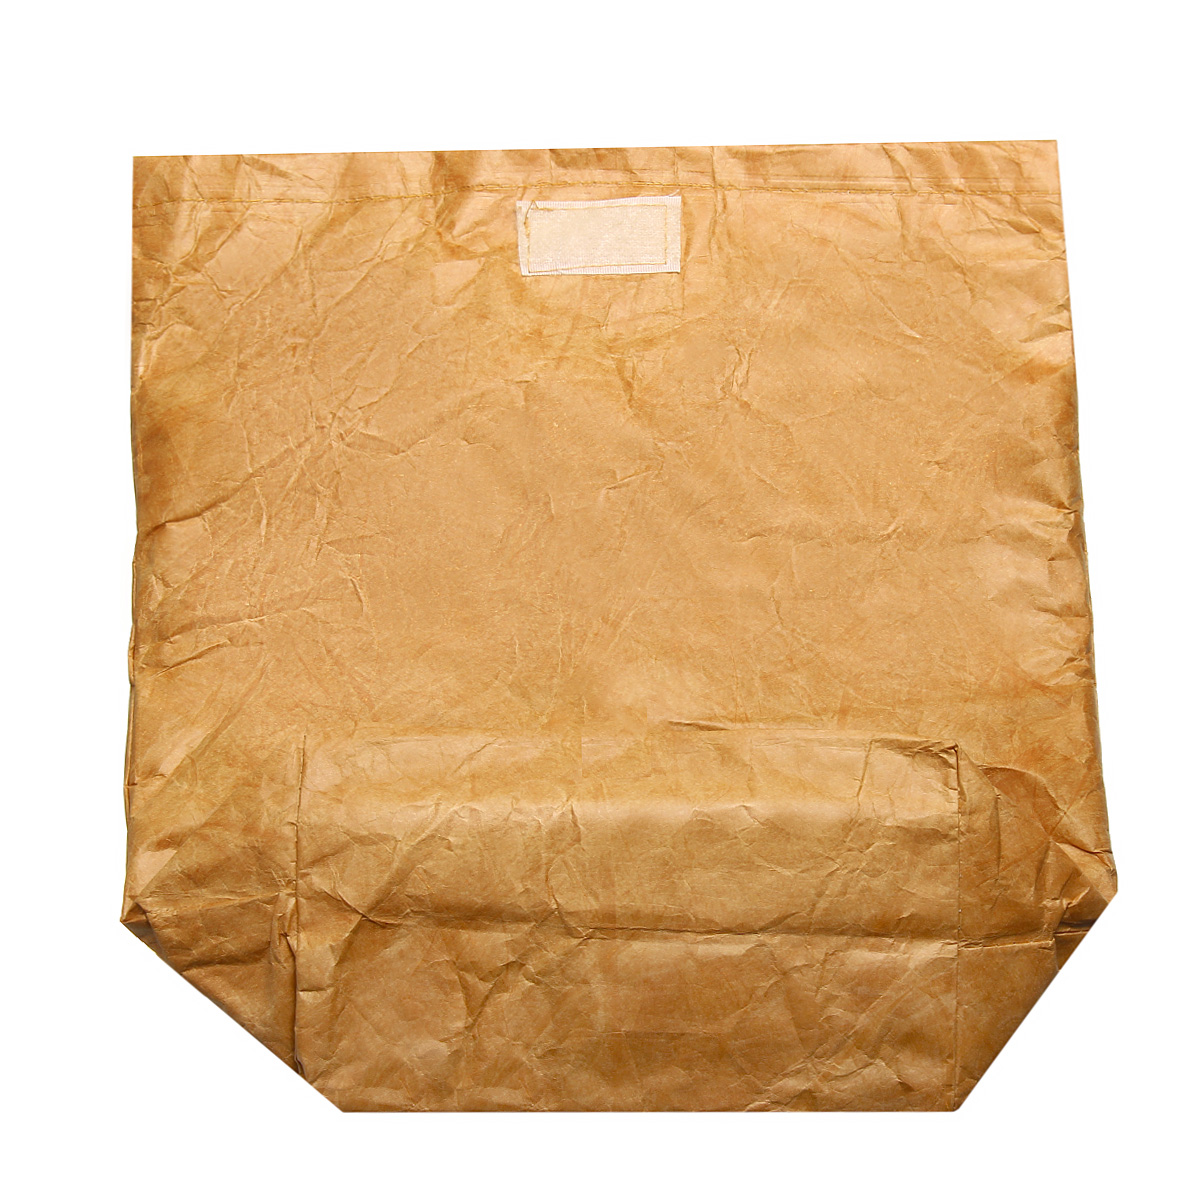 6L-Brown-Kraft-Paper-Lunch-Bag-Reusable-Durable-Insulated-Thermal-Cooler-Bag-1626790-6